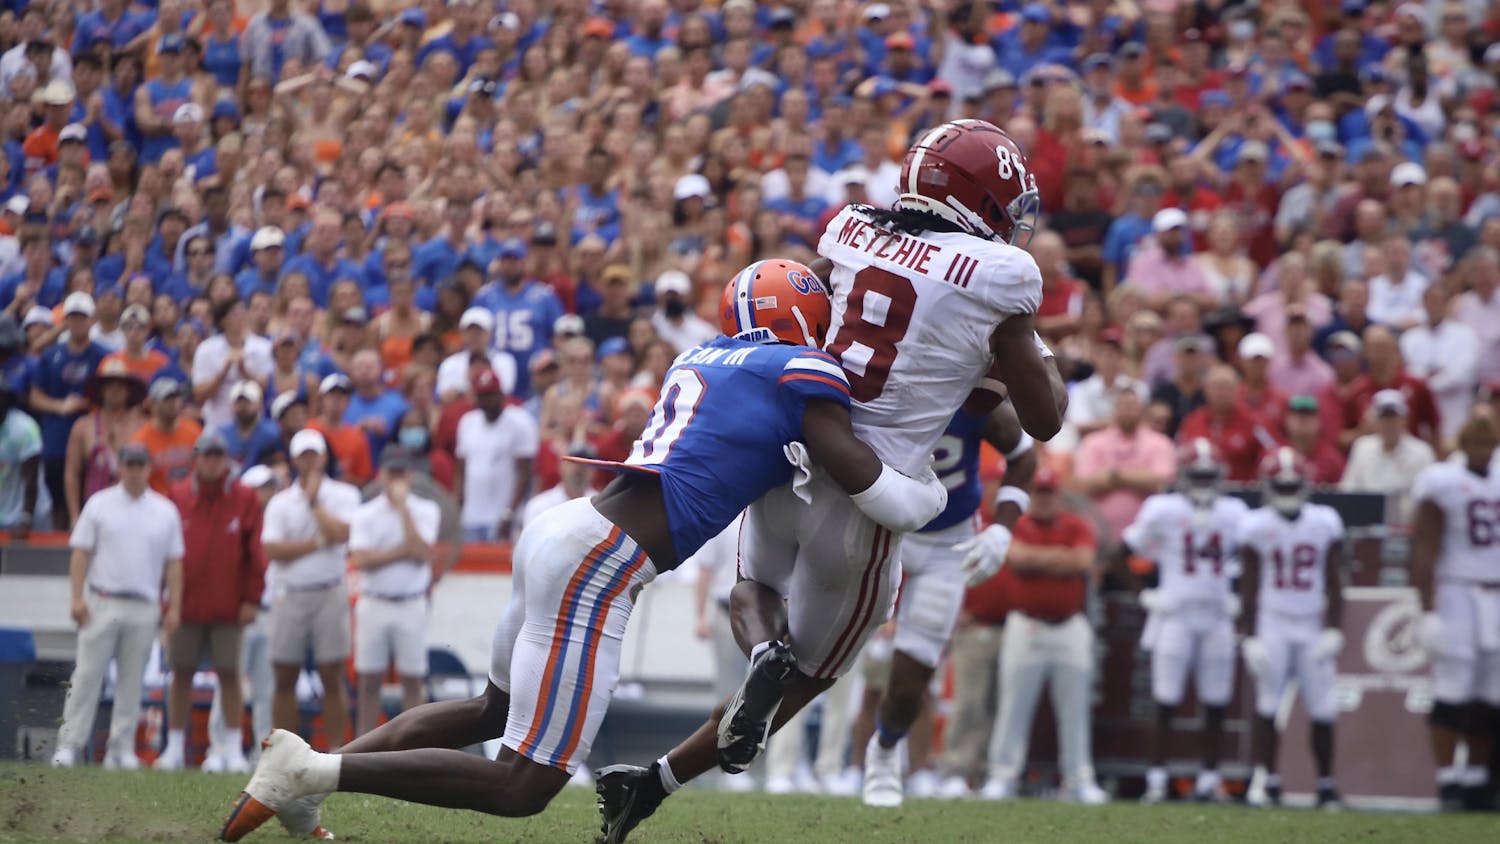 Safety Trey Dean III, pictured in blue, tackles Alabama wide receiver John Metchie III after he makes a catch. 